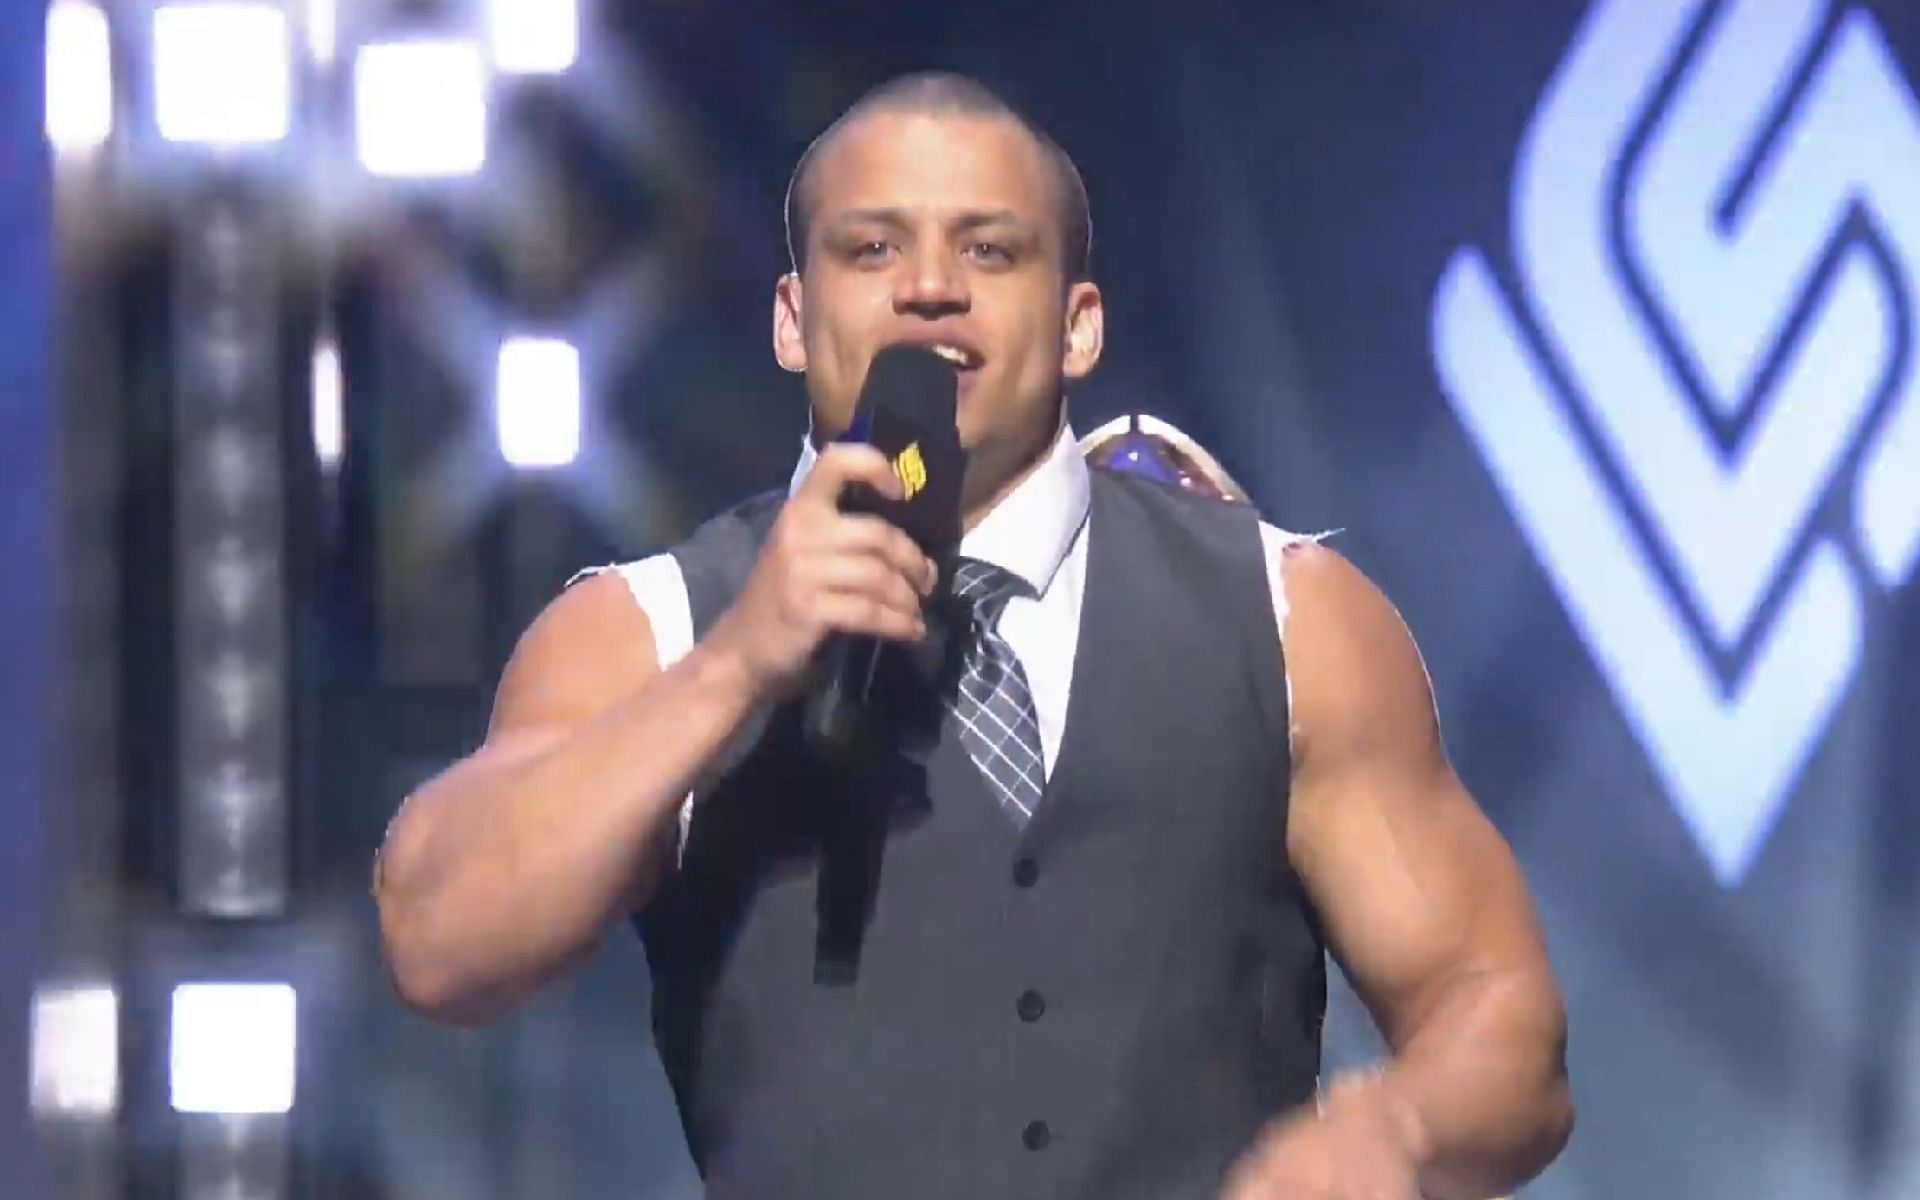 Tyler1 hypes up the grand finals for League Championship Series (Image via LCS/Twitch)